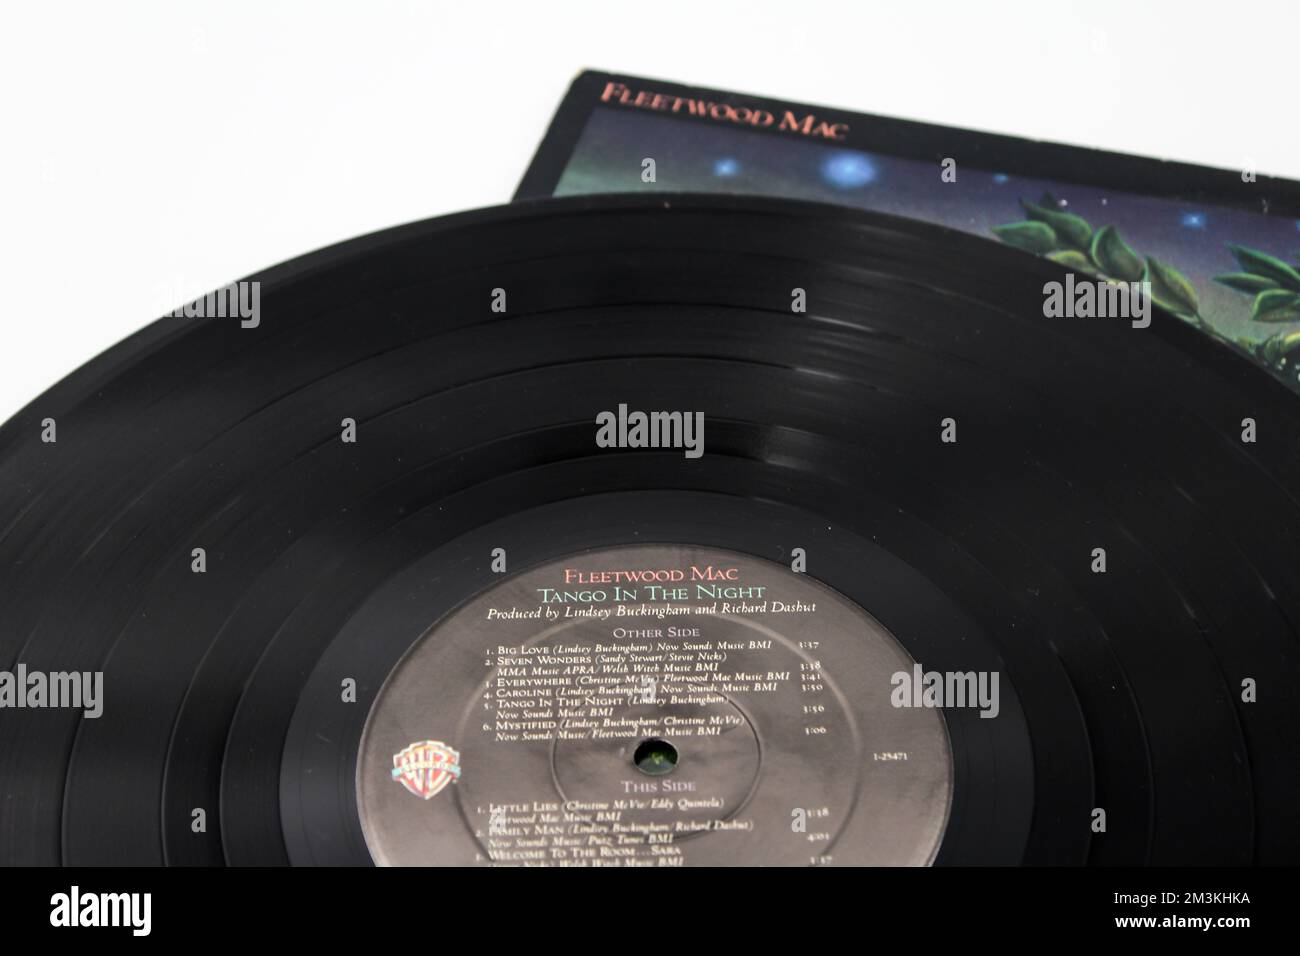 Rock and soft rock band, Fleetwood Mac music album on vinyl record LP disc. Titled: Tango in the Night album cover on vinyl record LP Stock Photo